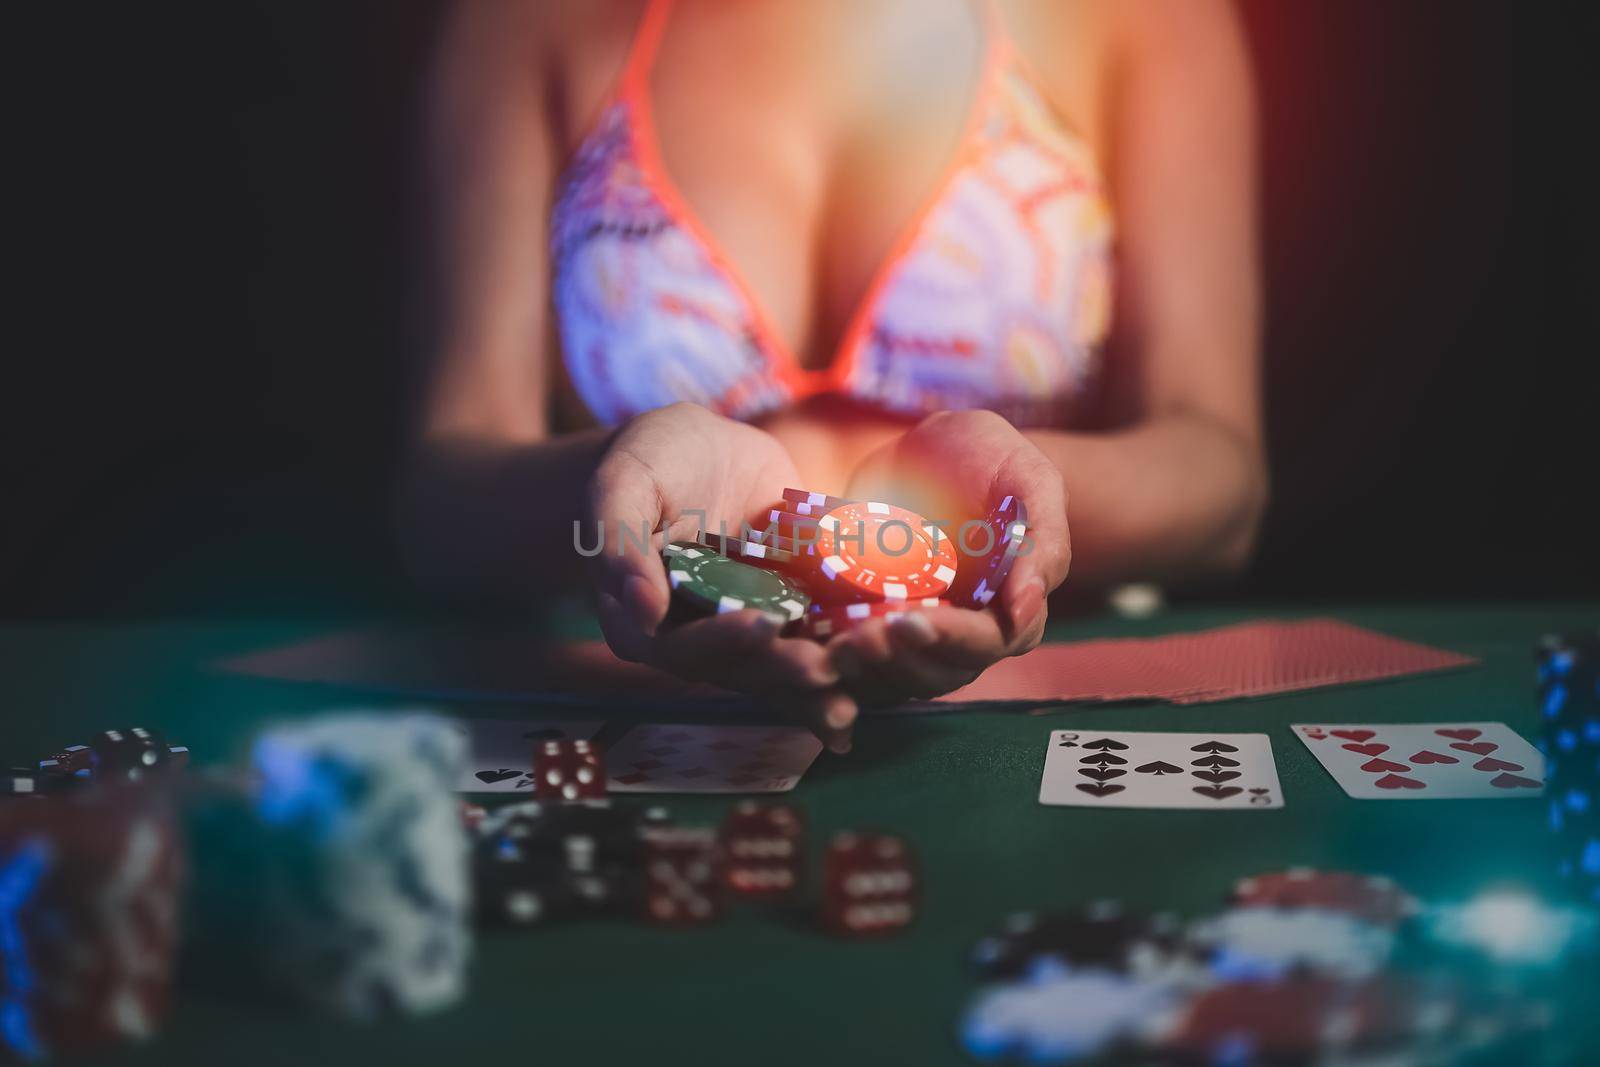 Woman wearing bikini dealer or croupier shuffles poker cards in a casino on the background of a table,asain woman holding chips. Casino, poker, poker game concept